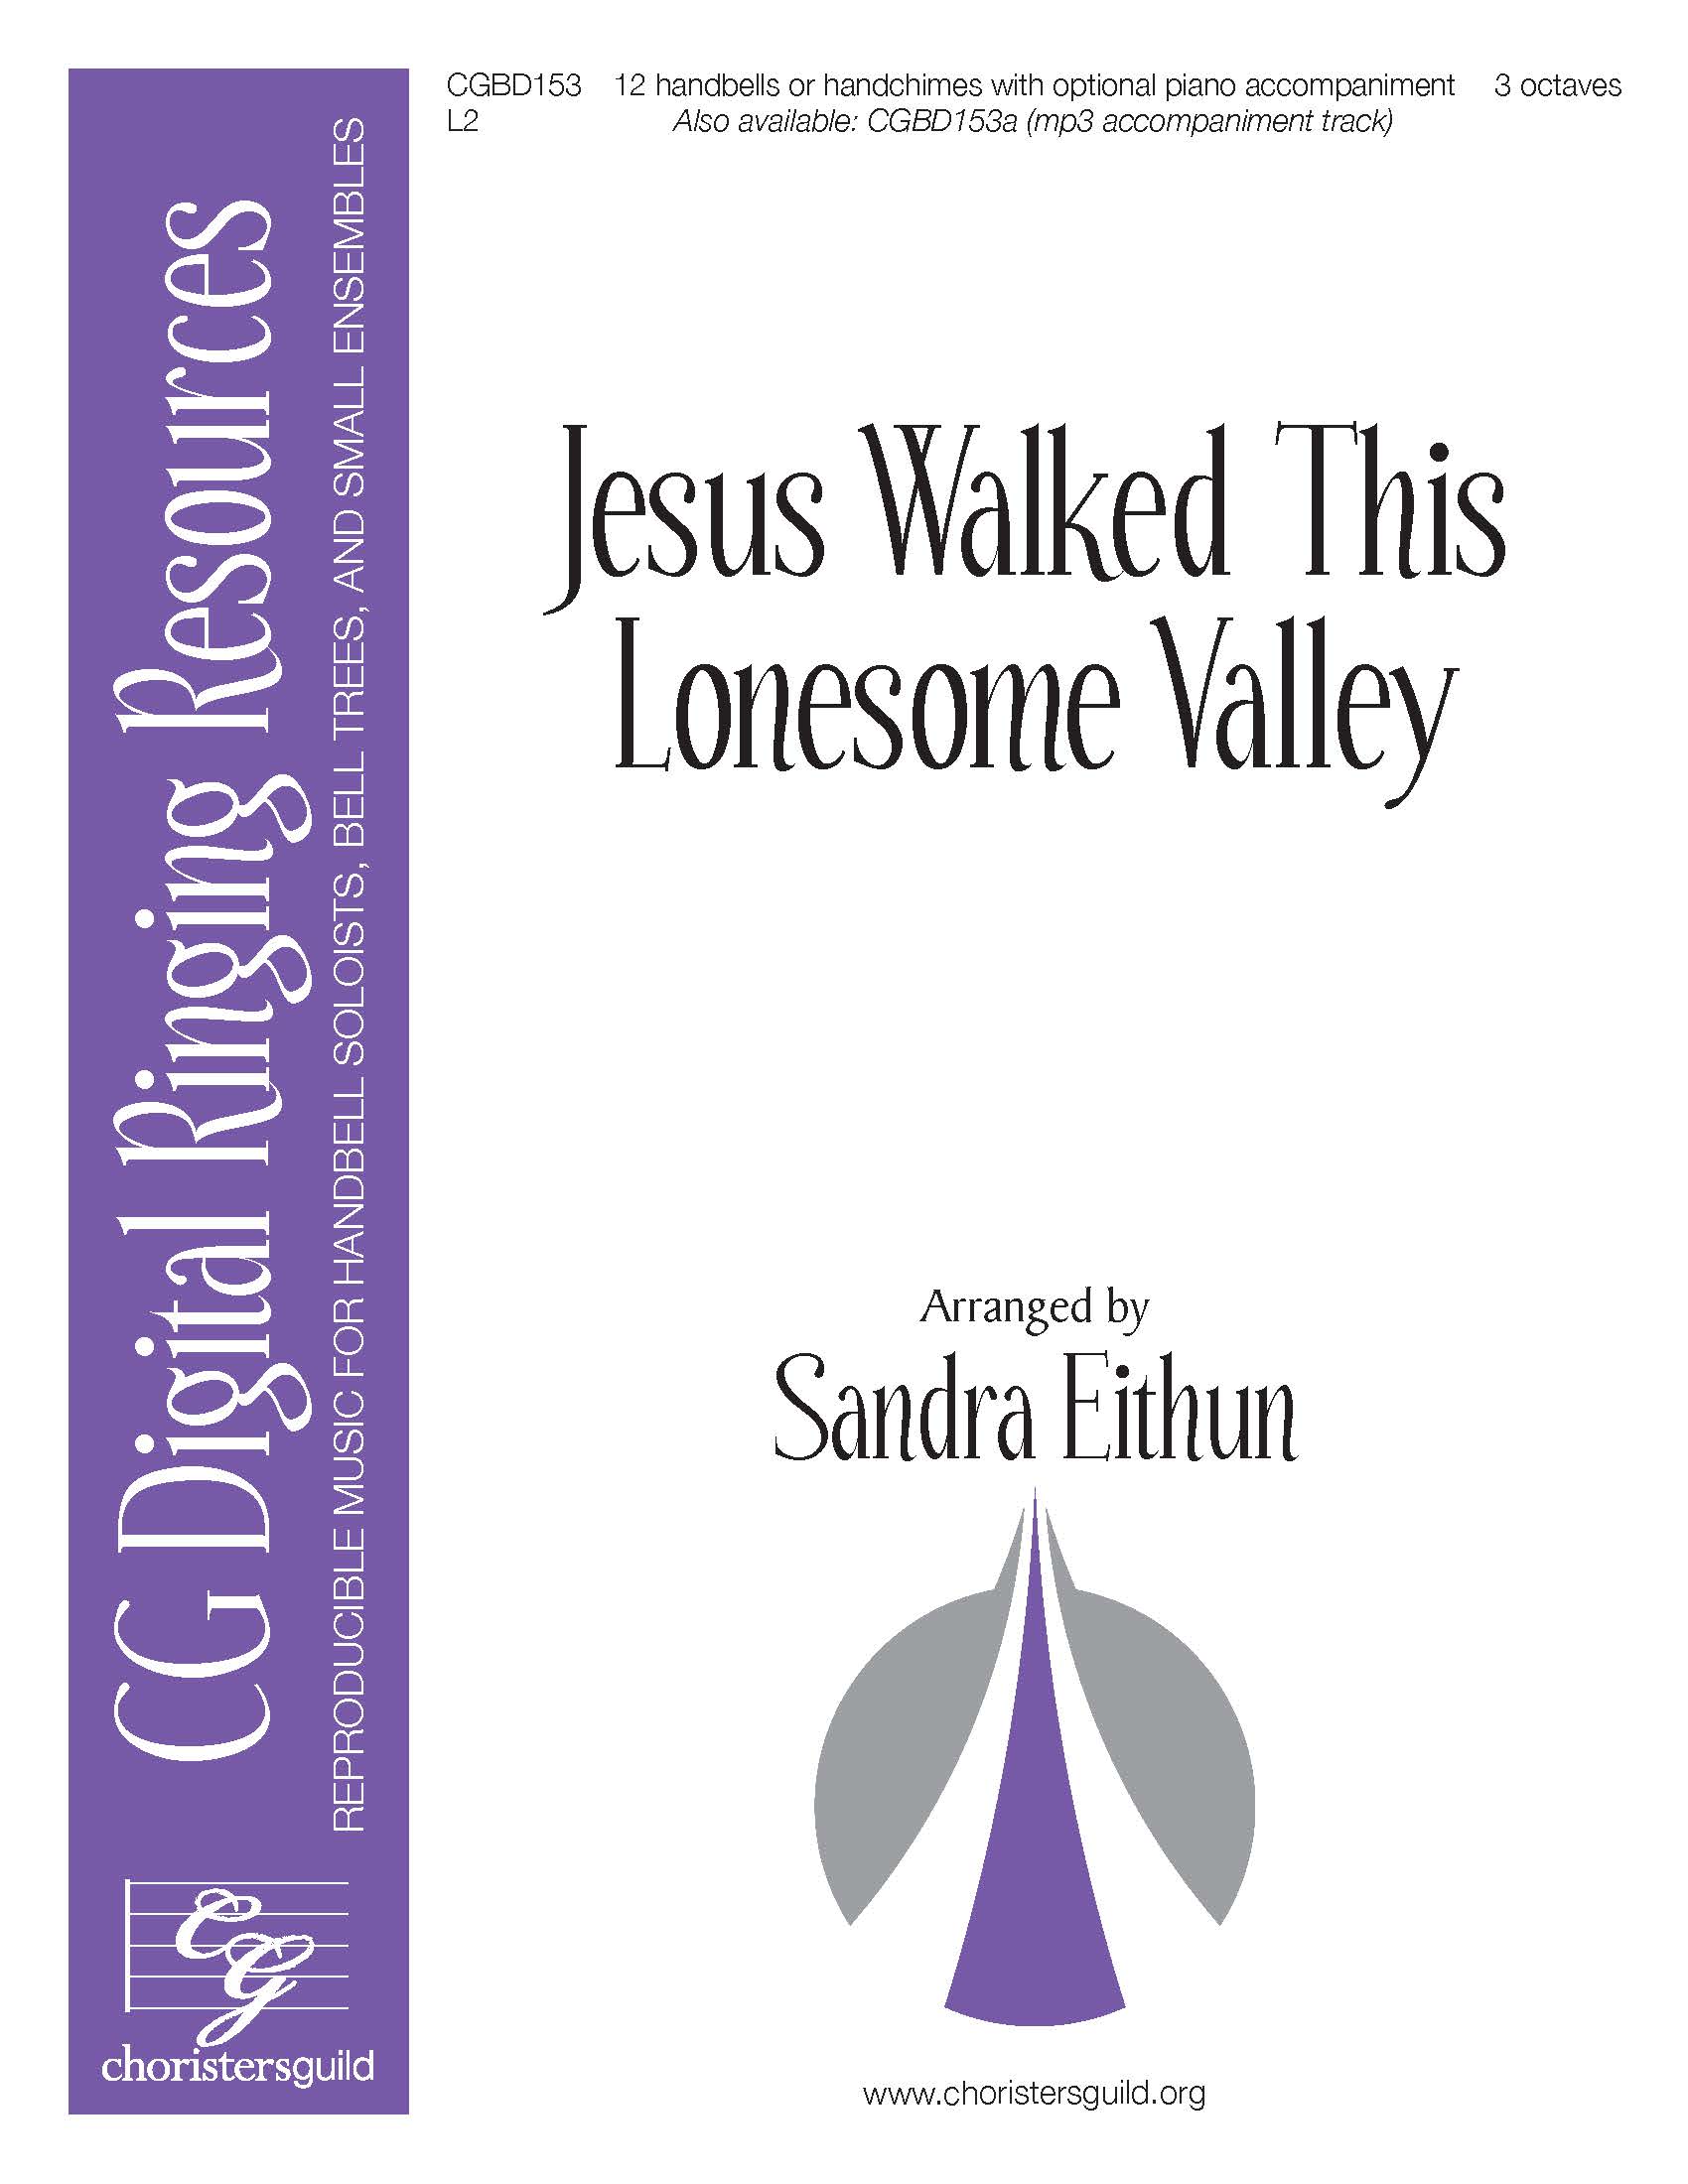 Jesus Walked This Lonesome Valley - Digital Accompaniment Track